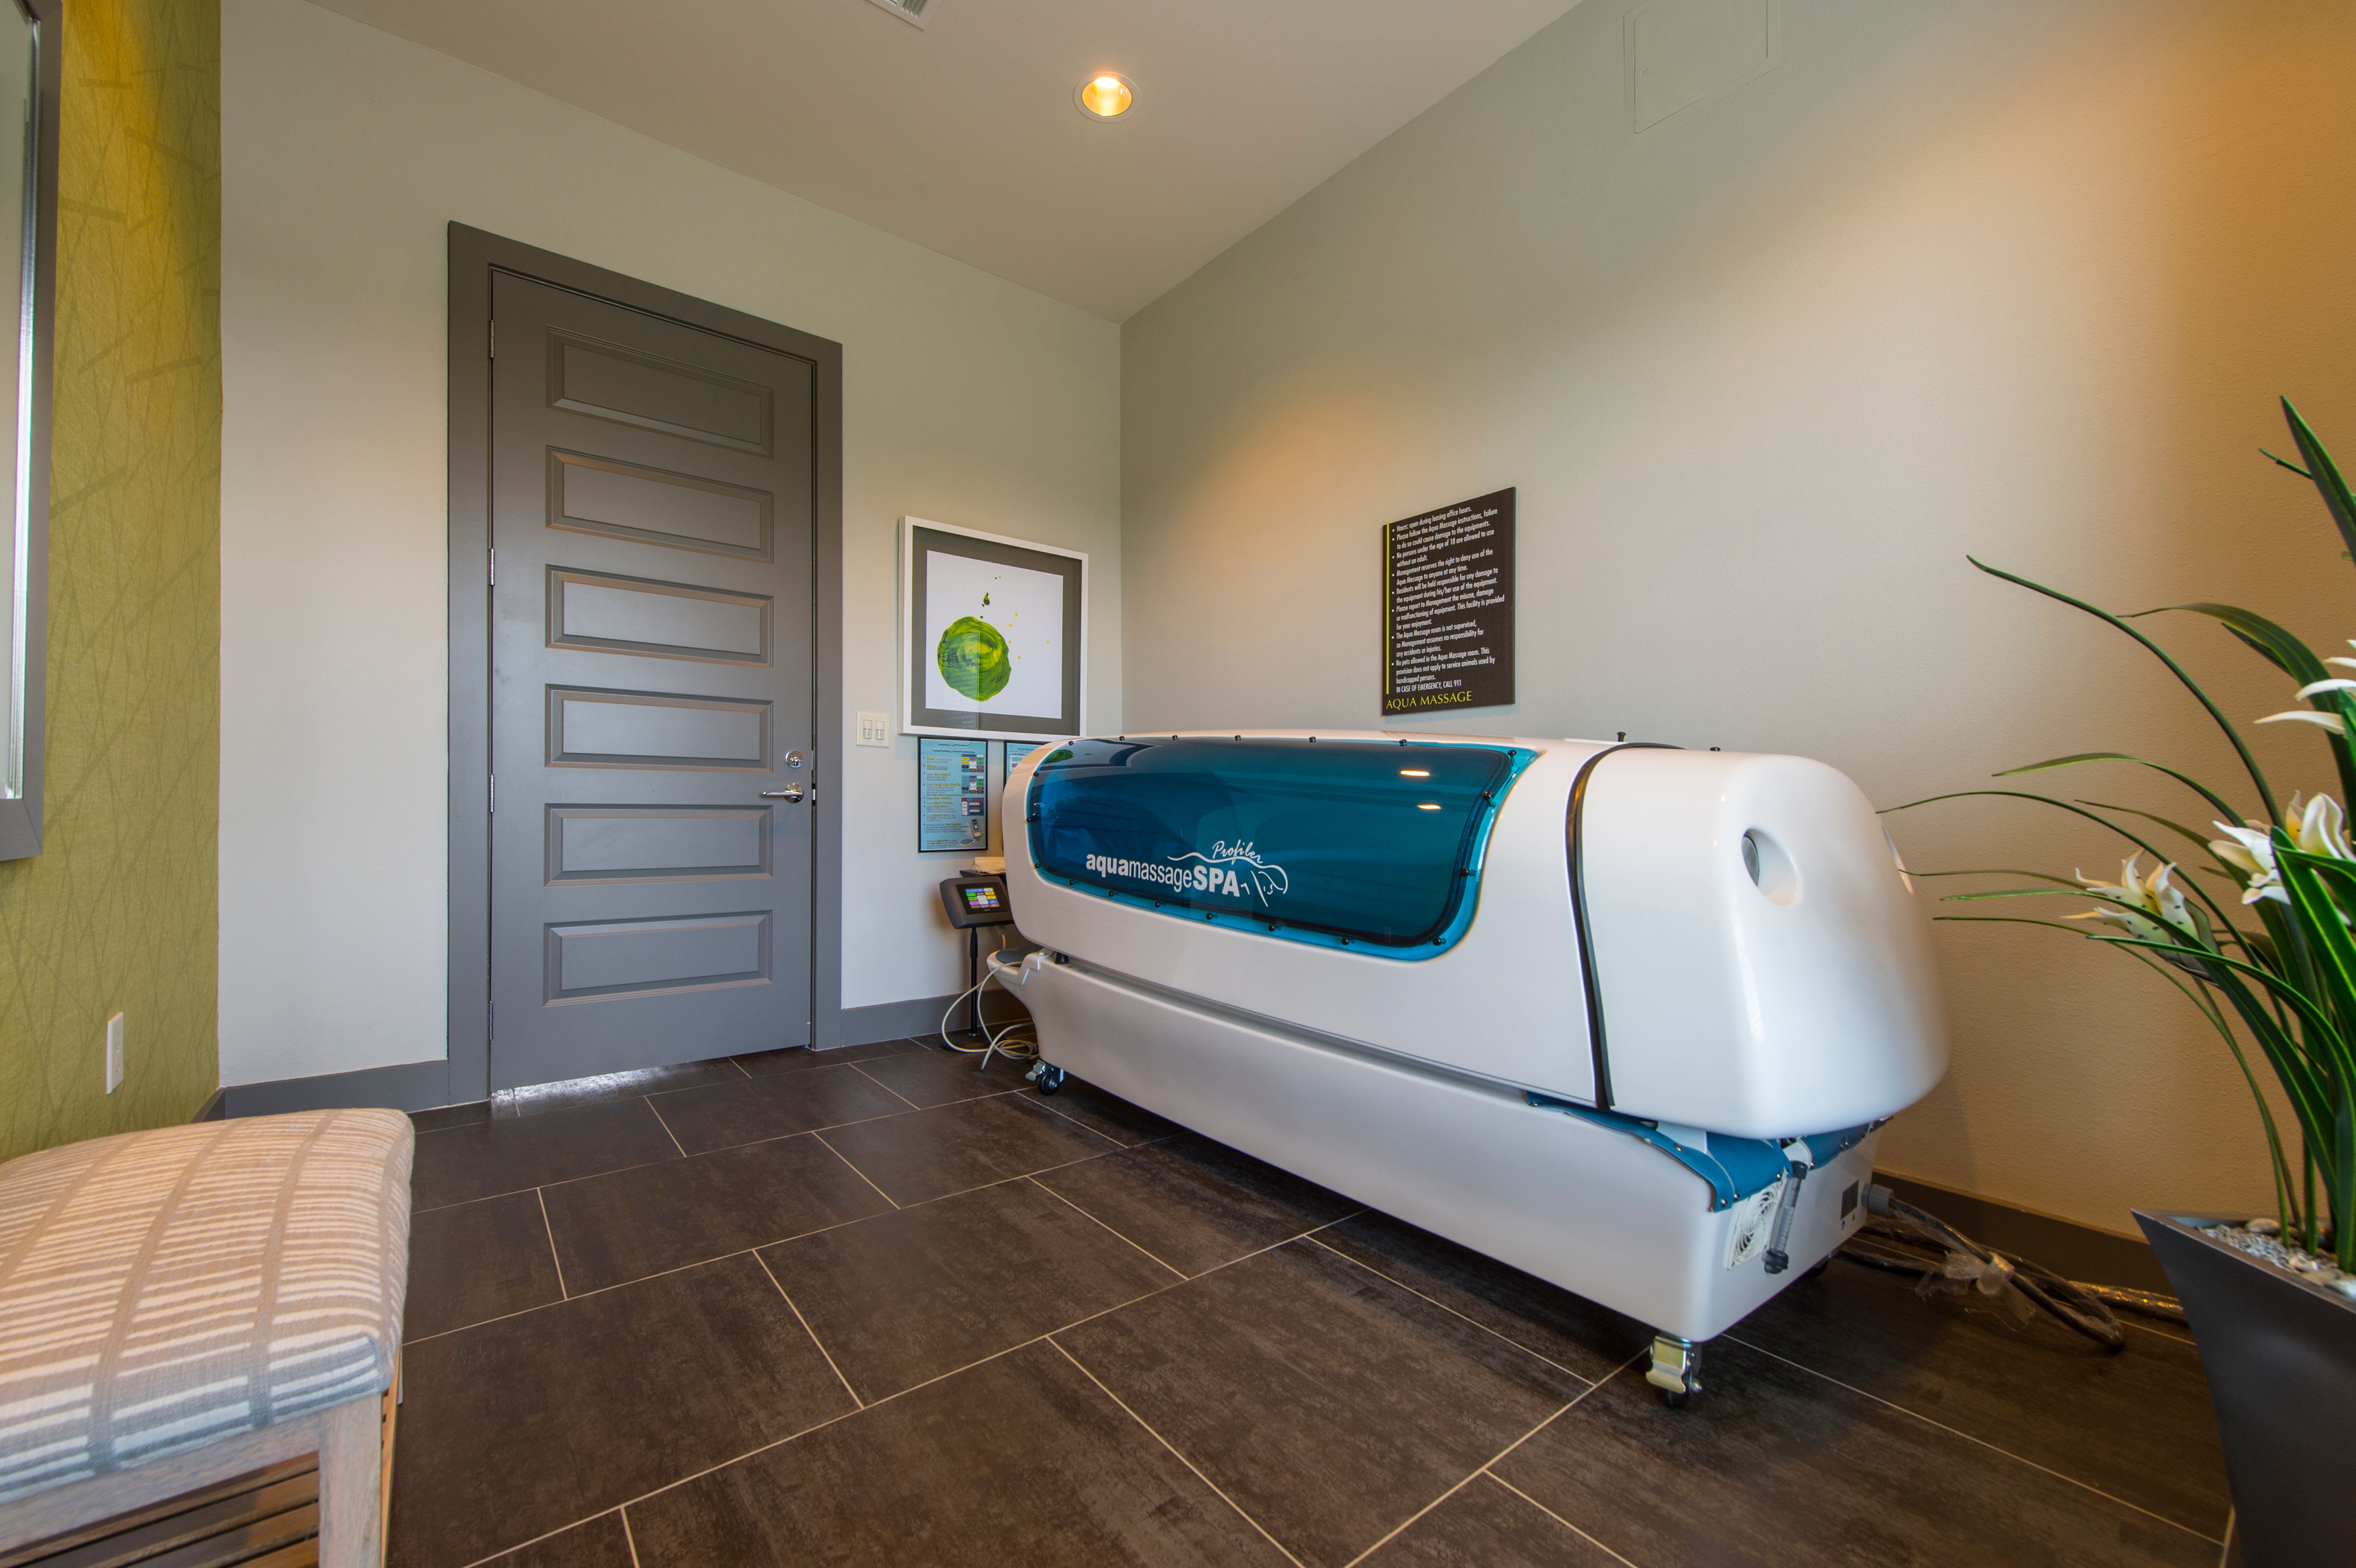 View virtual tour for the Aqua Massage Spa at Elite 99 West in Katy, Texas